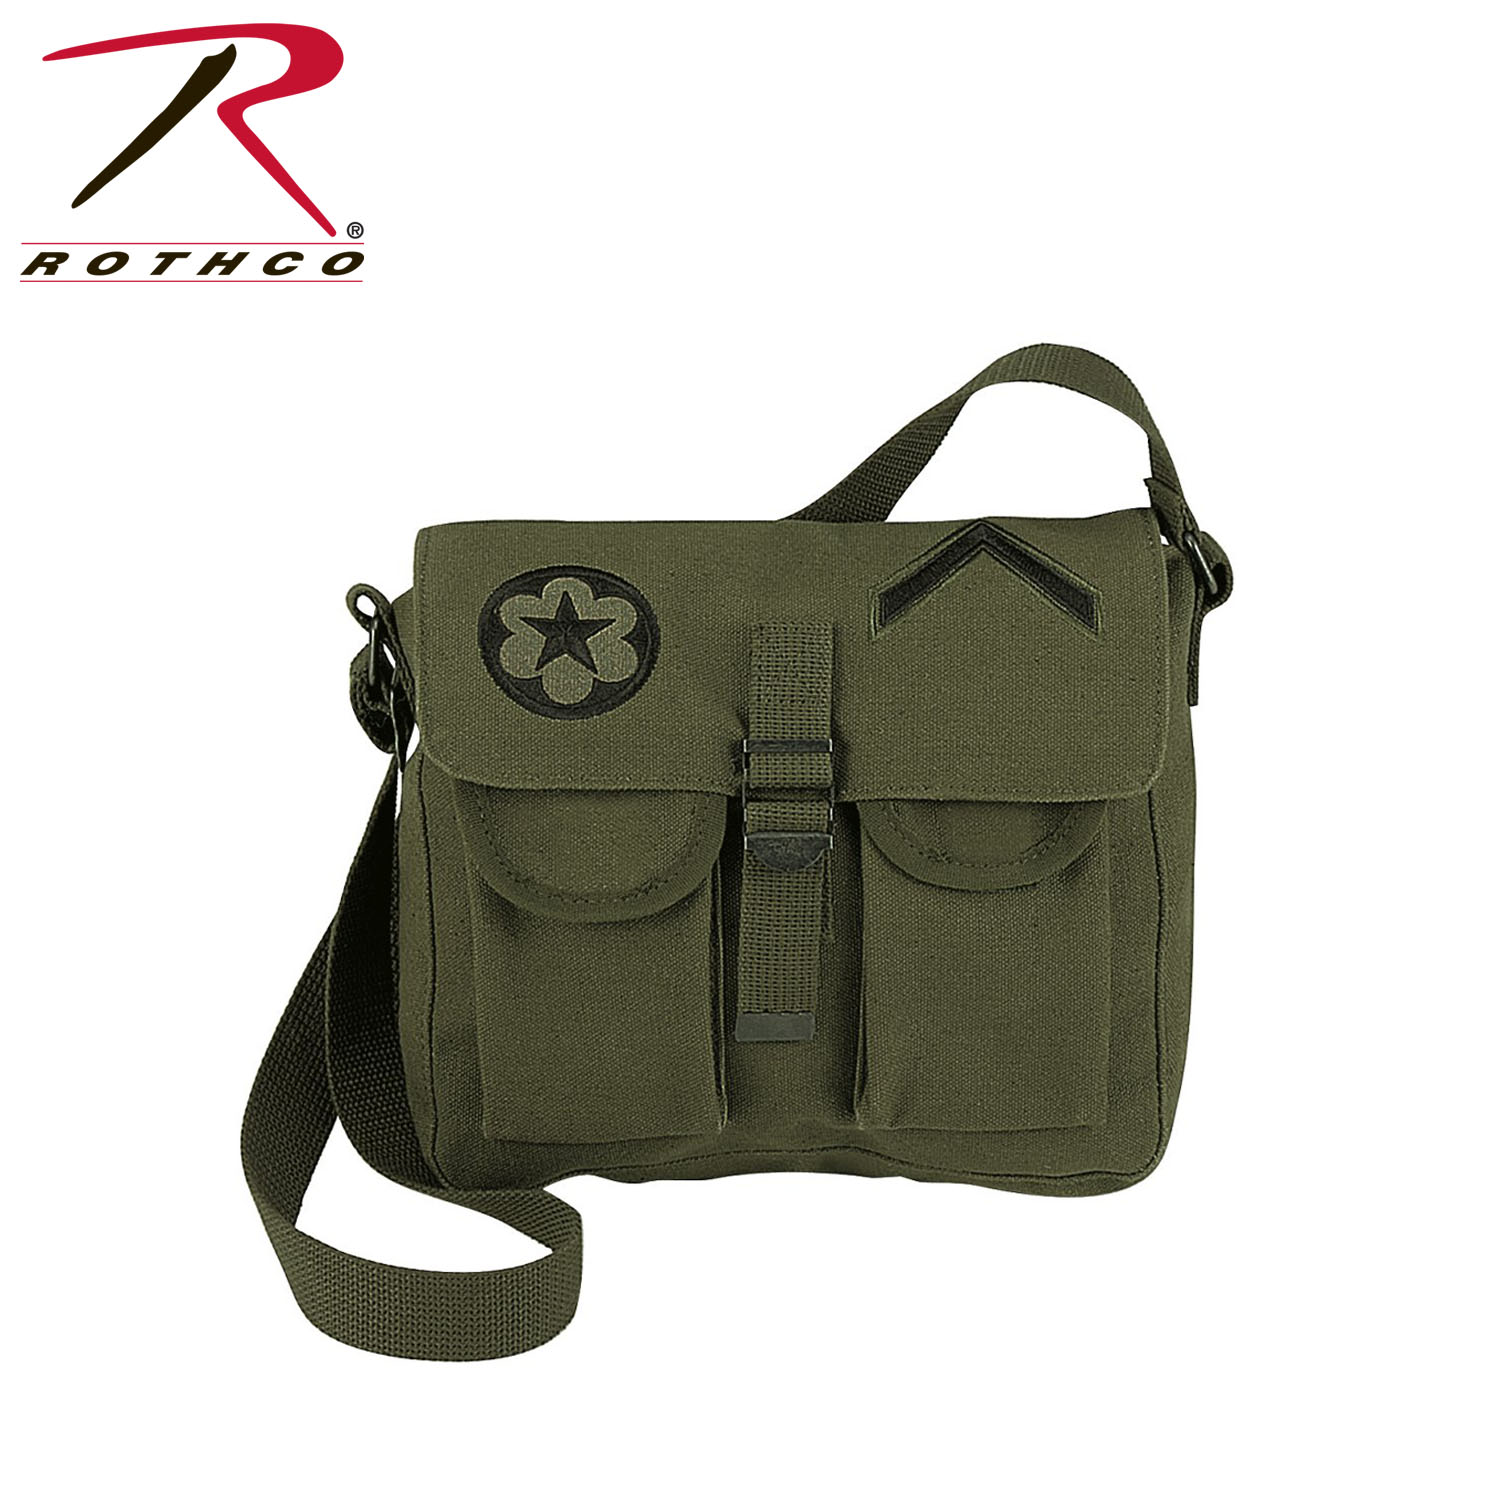 Rothco Canvas Ammo Shoulder Bag w/ Military Patches